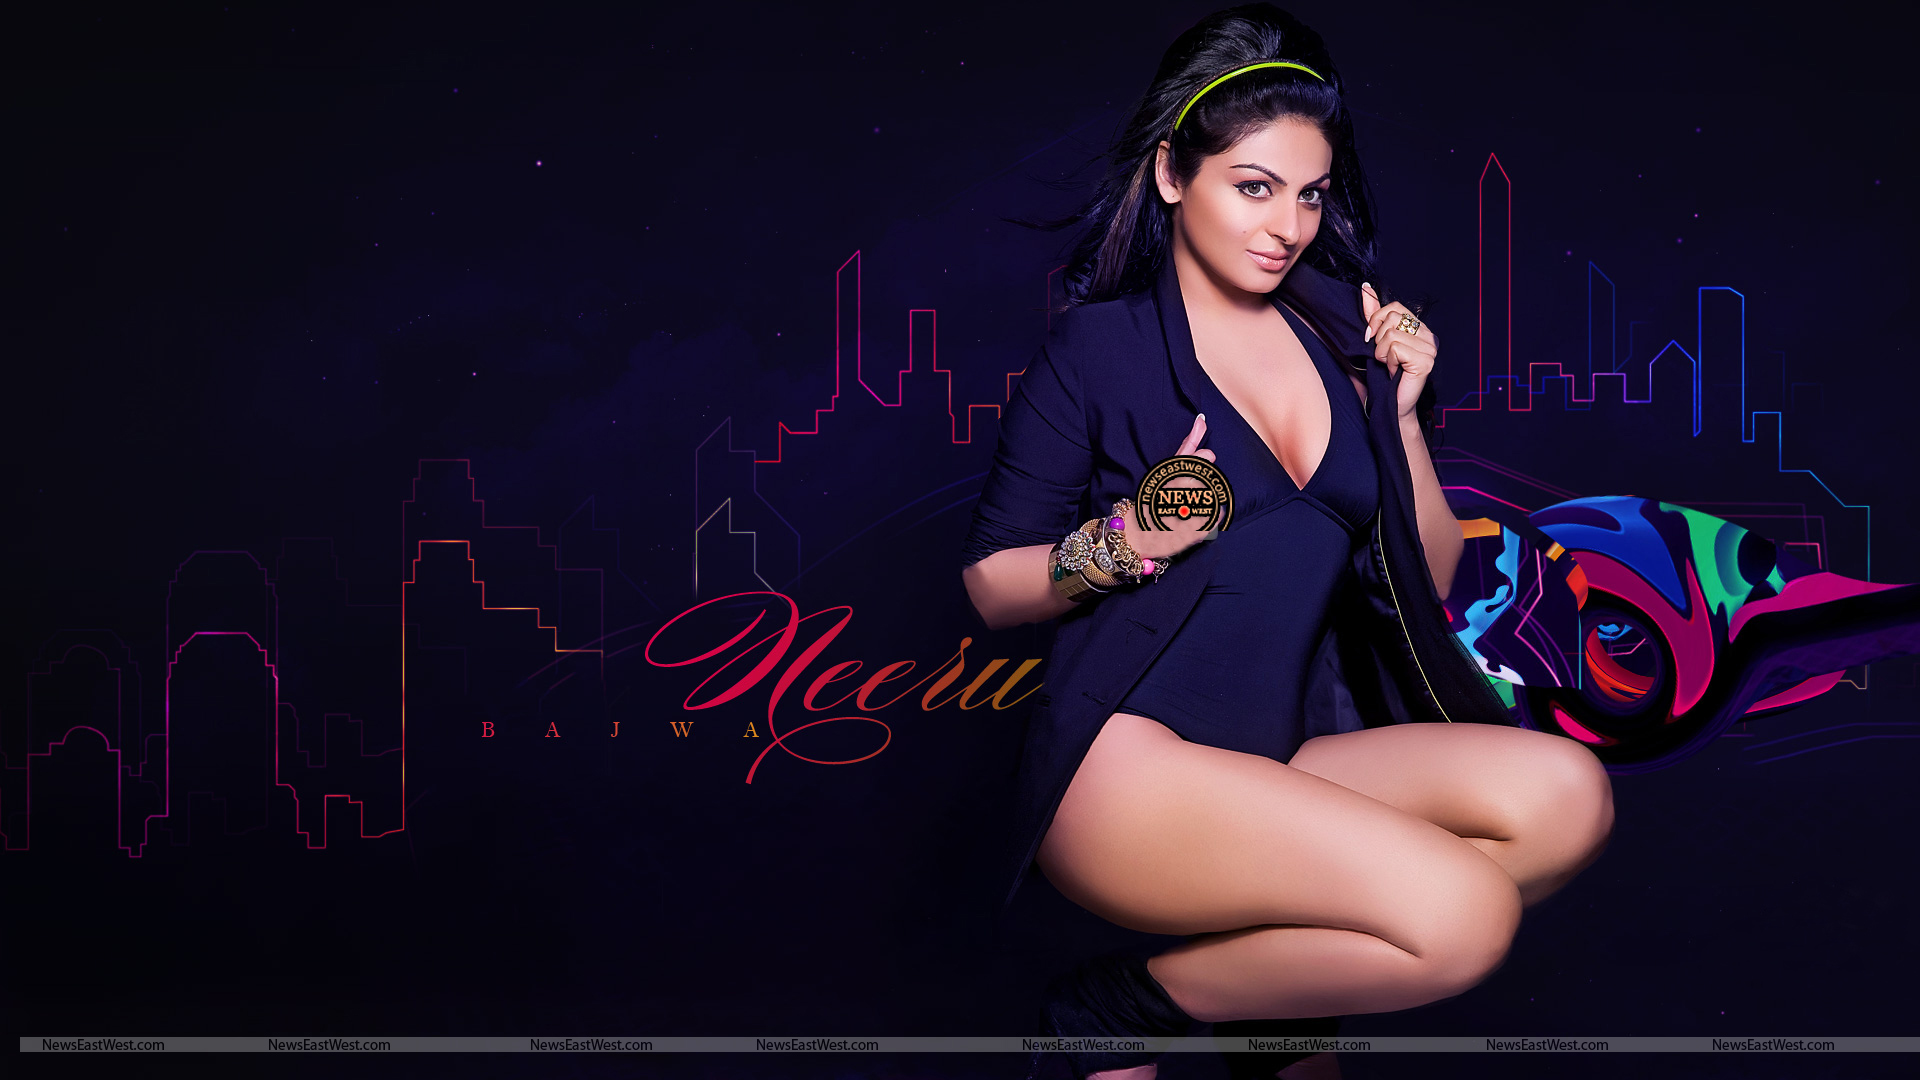 Actress Neeru Bajwa Hot Pictures And Wallpapers.